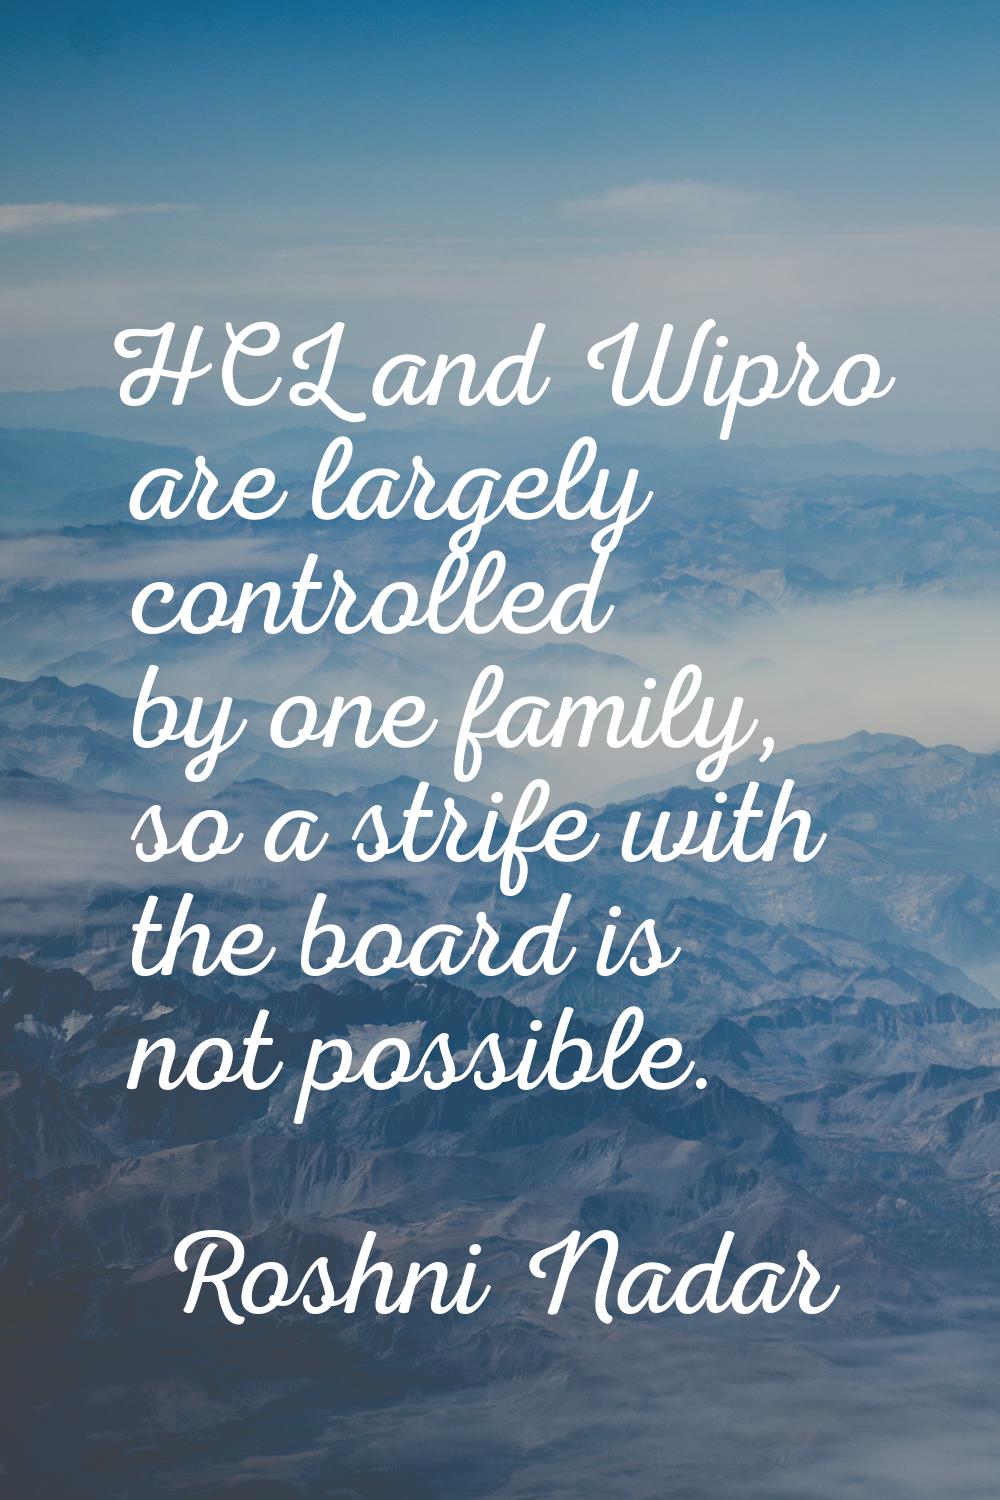 HCL and Wipro are largely controlled by one family, so a strife with the board is not possible.